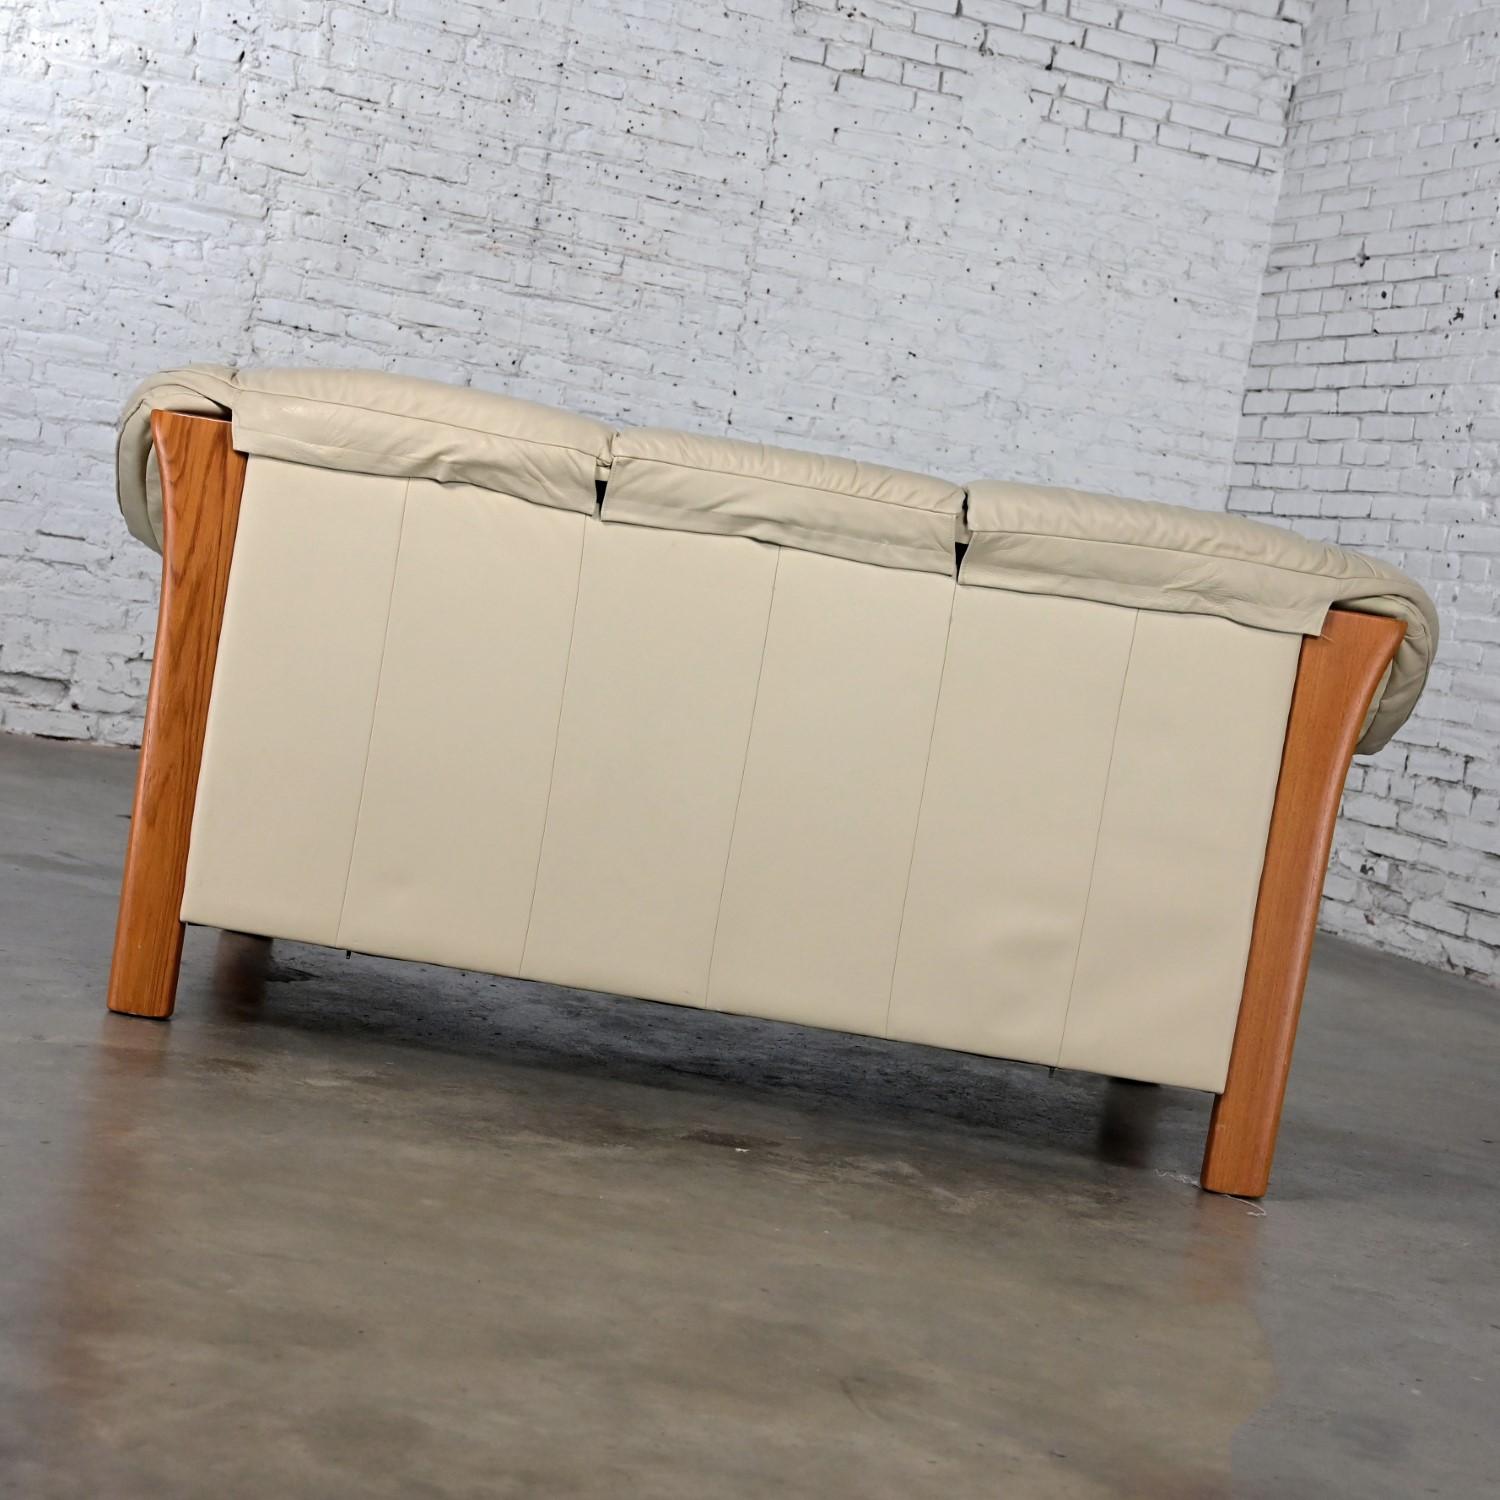 Scandinavian Modern Teak & Off White Leather Small Sofa Attributed to Ekornes For Sale 4